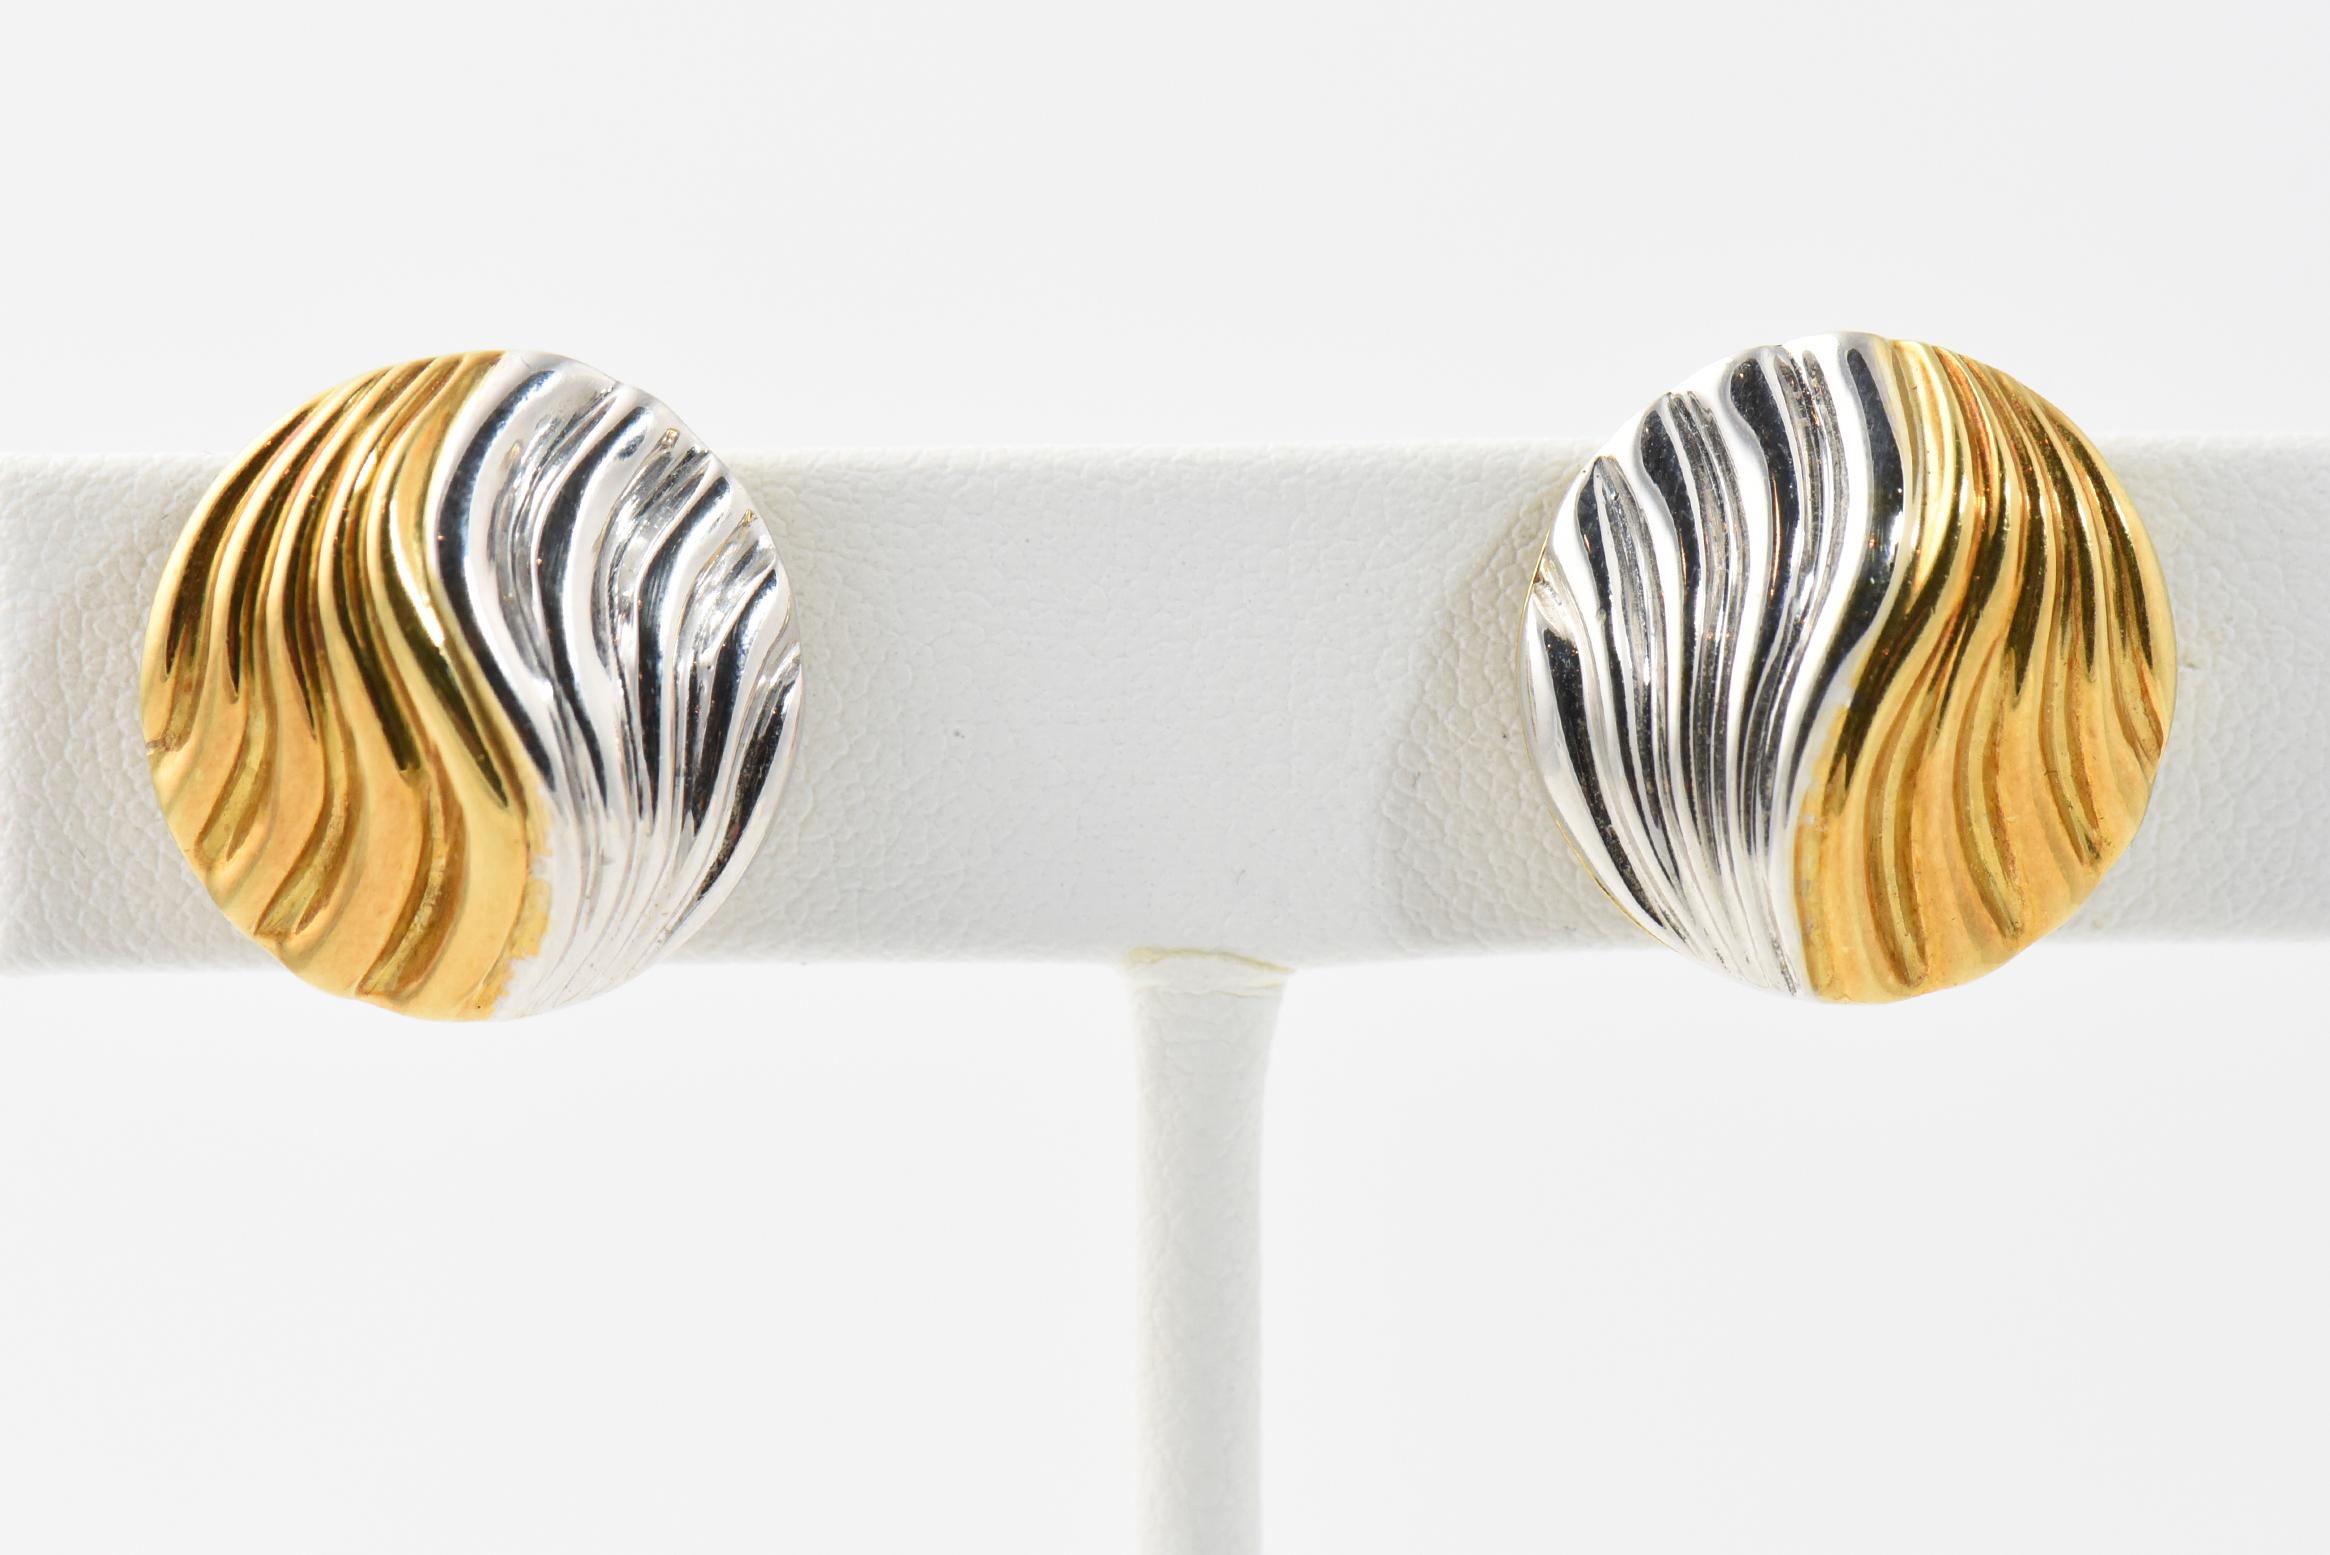 Italian 18K yellow and white gold earrings with three dimension textured wave surface marketed by Neiman Marcus. Clip backs (no posts). Marked: Neiman Marcus 750 Italy.
